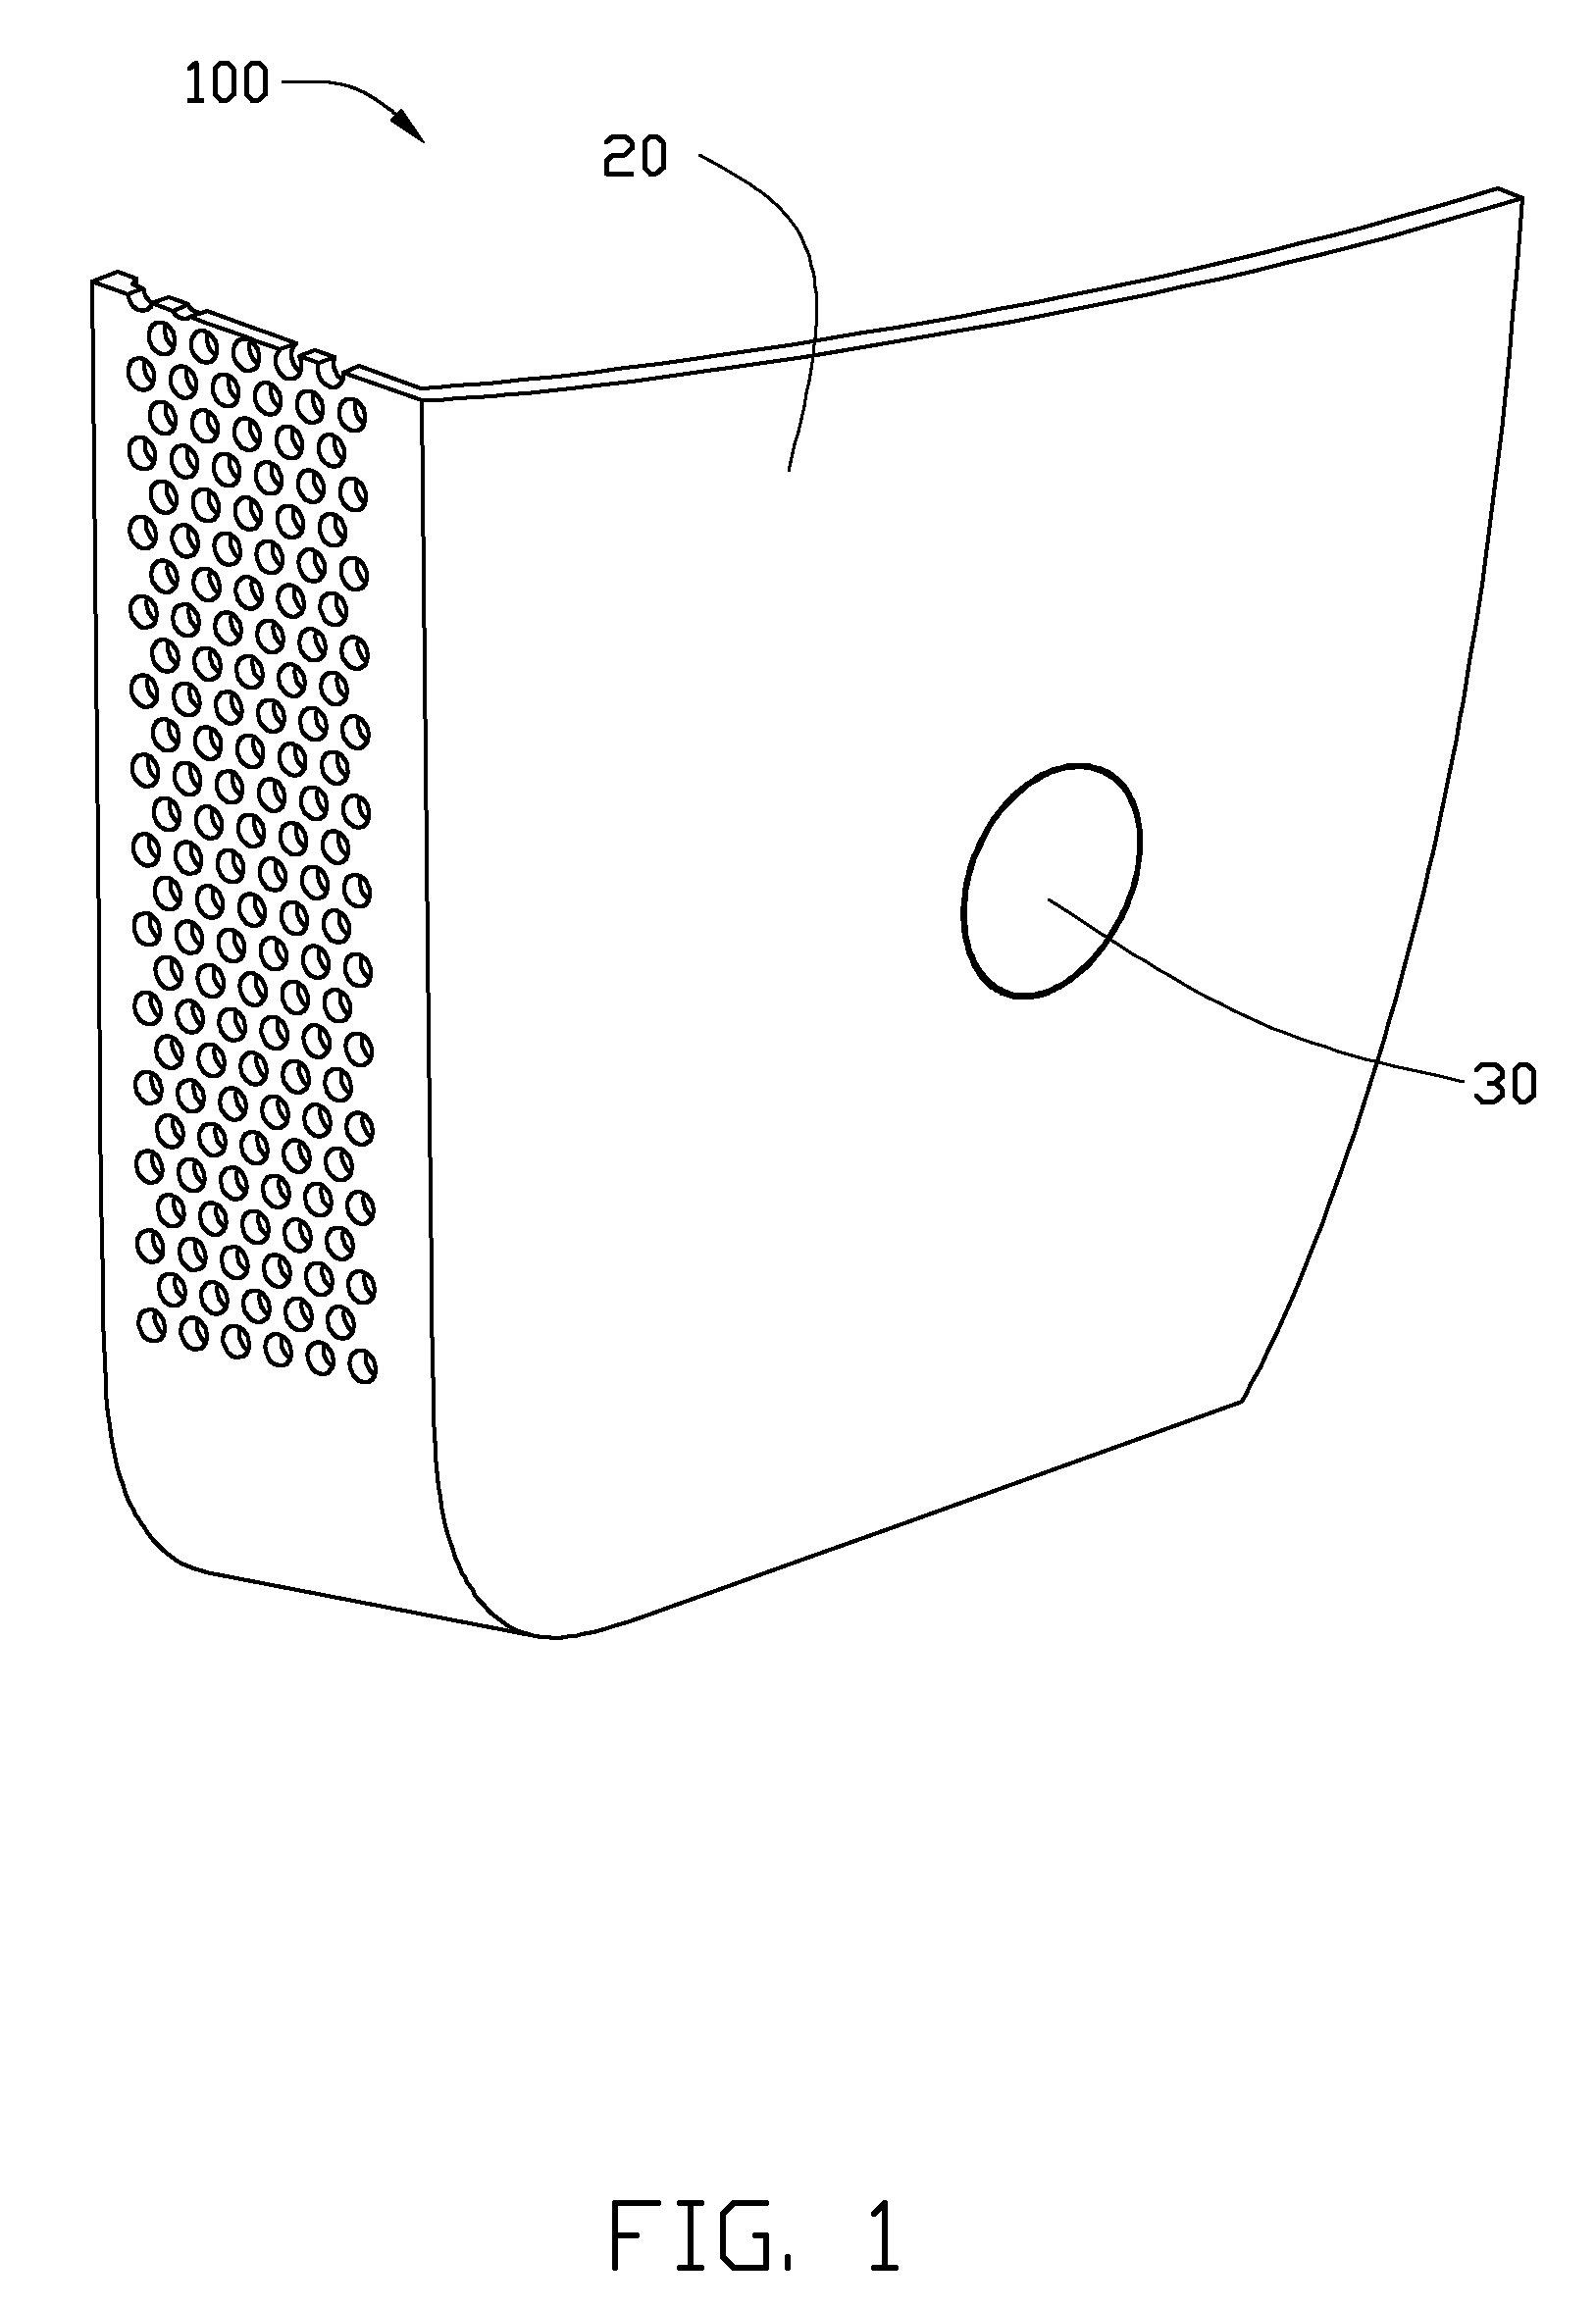 Electronic device with power button assembly